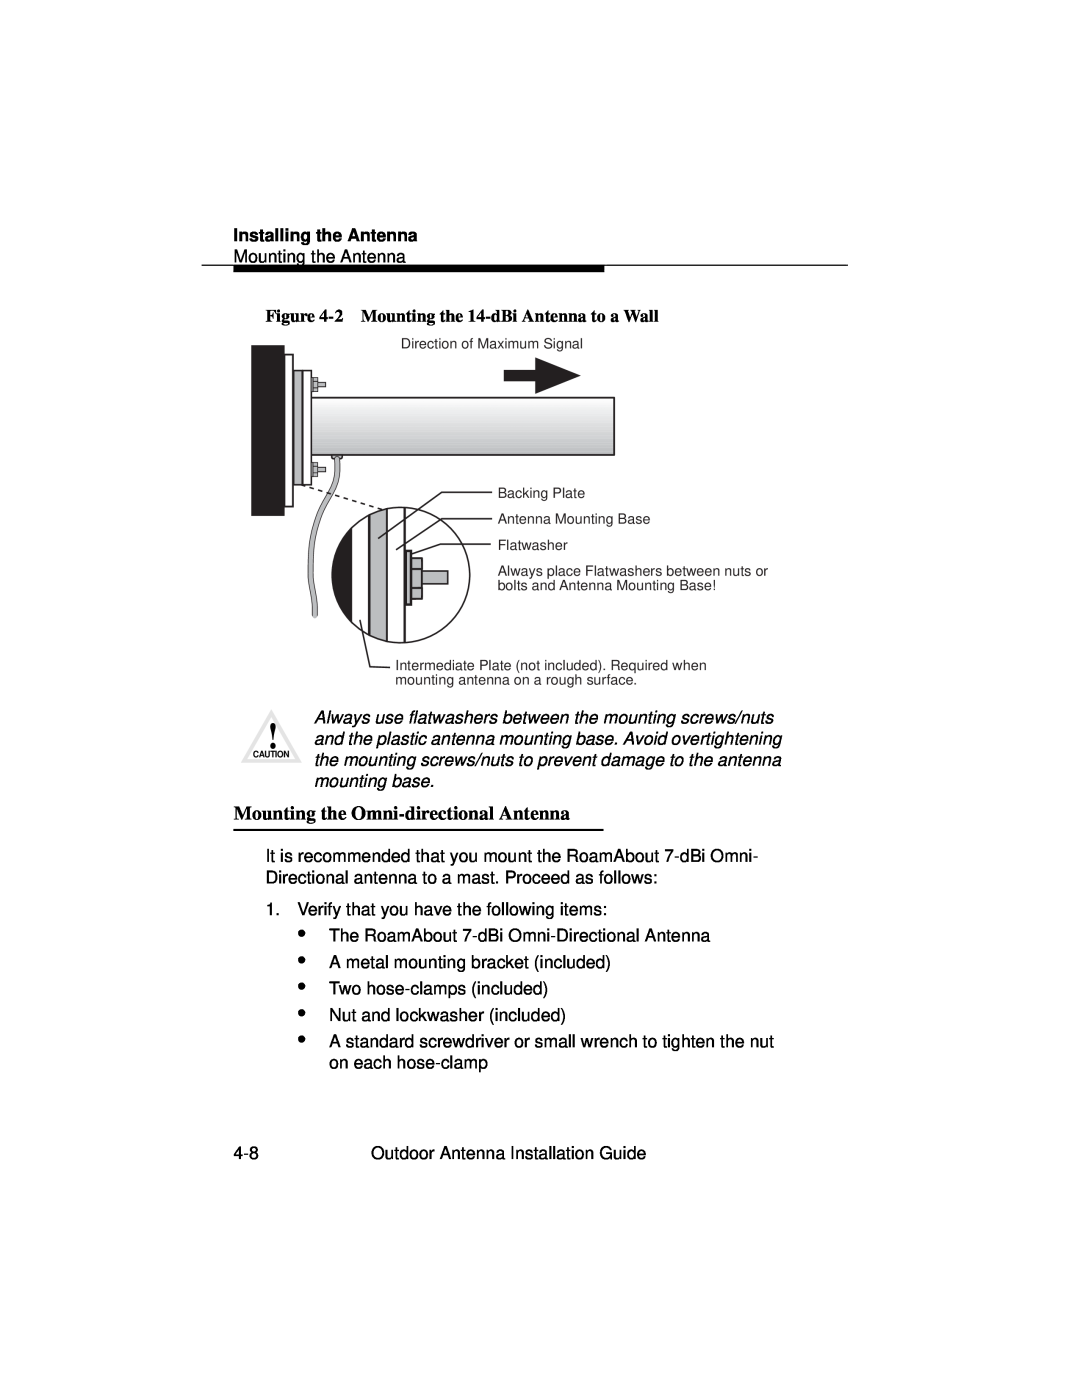 Cabletron Systems 9033073 manual Mounting the Omni-directionalAntenna, Installing the Antenna 